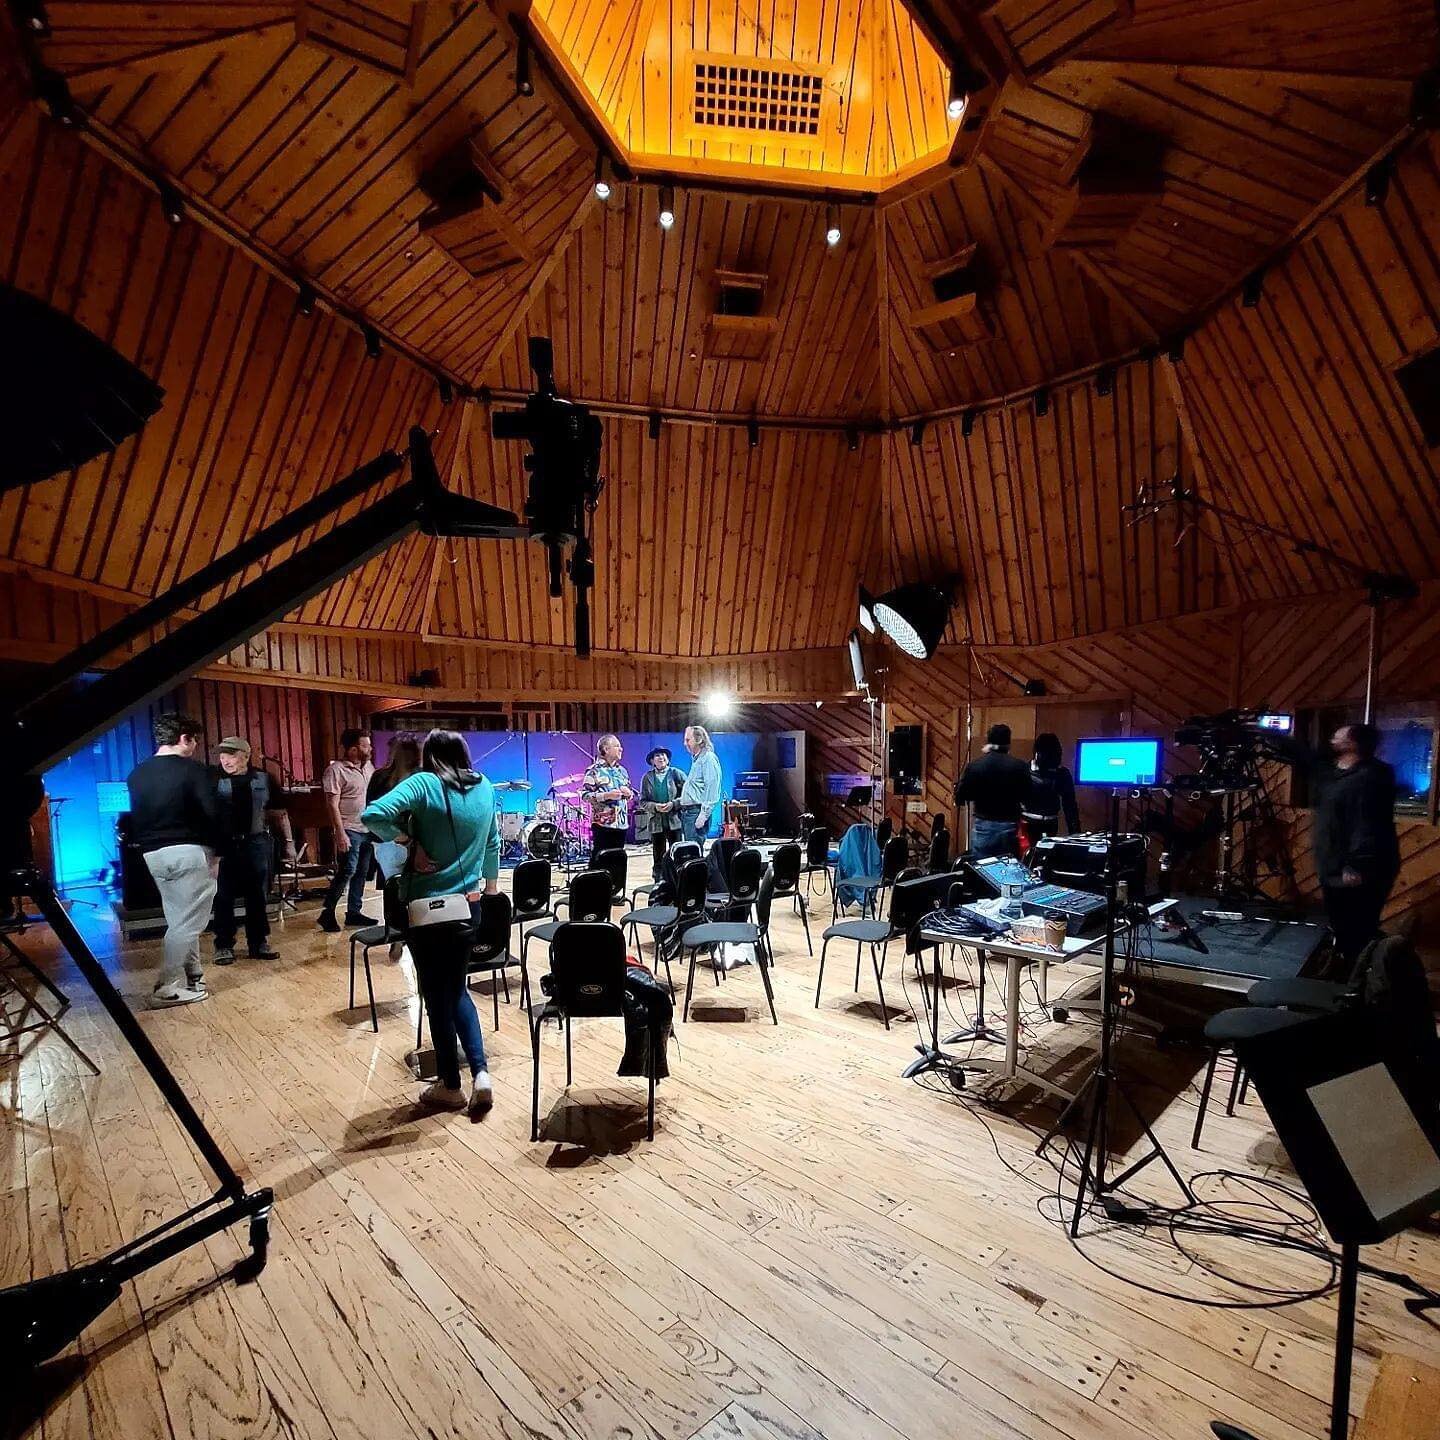 what an indescribable feeling to make music in this historic space. Thank you so much to Vanessa Collier for making this happen. A live DVD is coming your way!!!